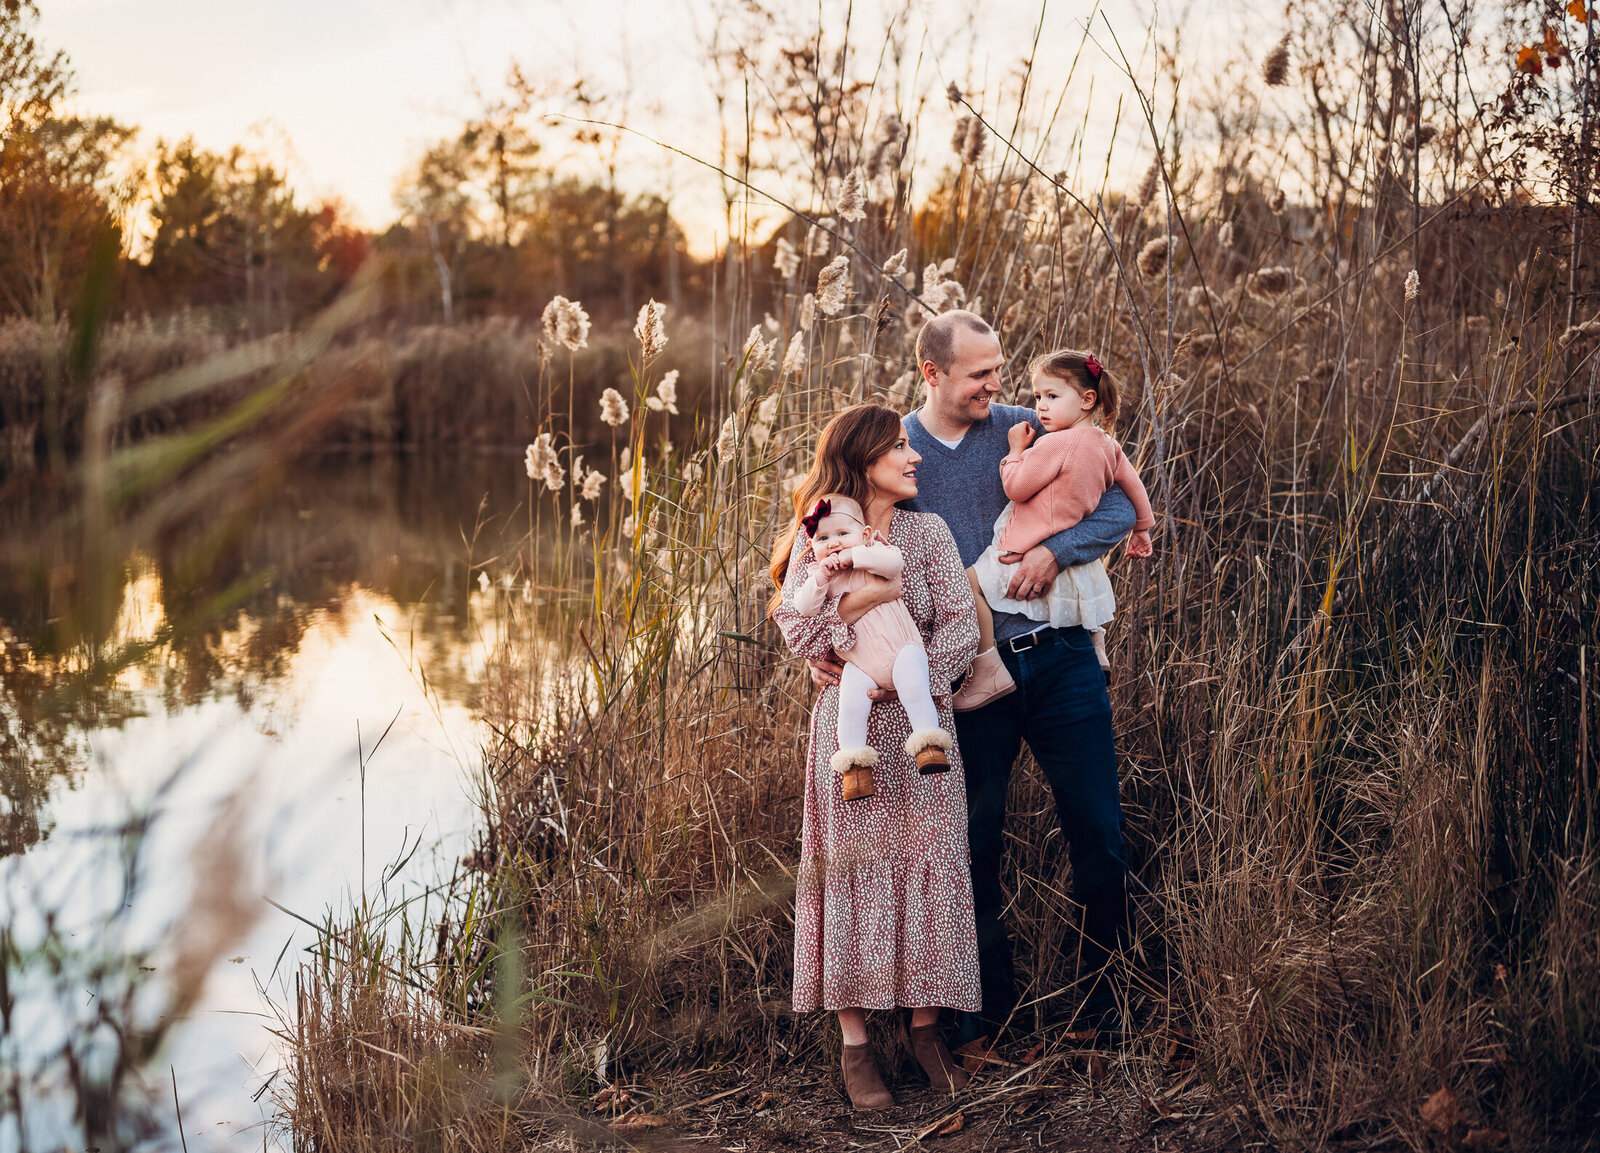 Family photography session outside at sunset